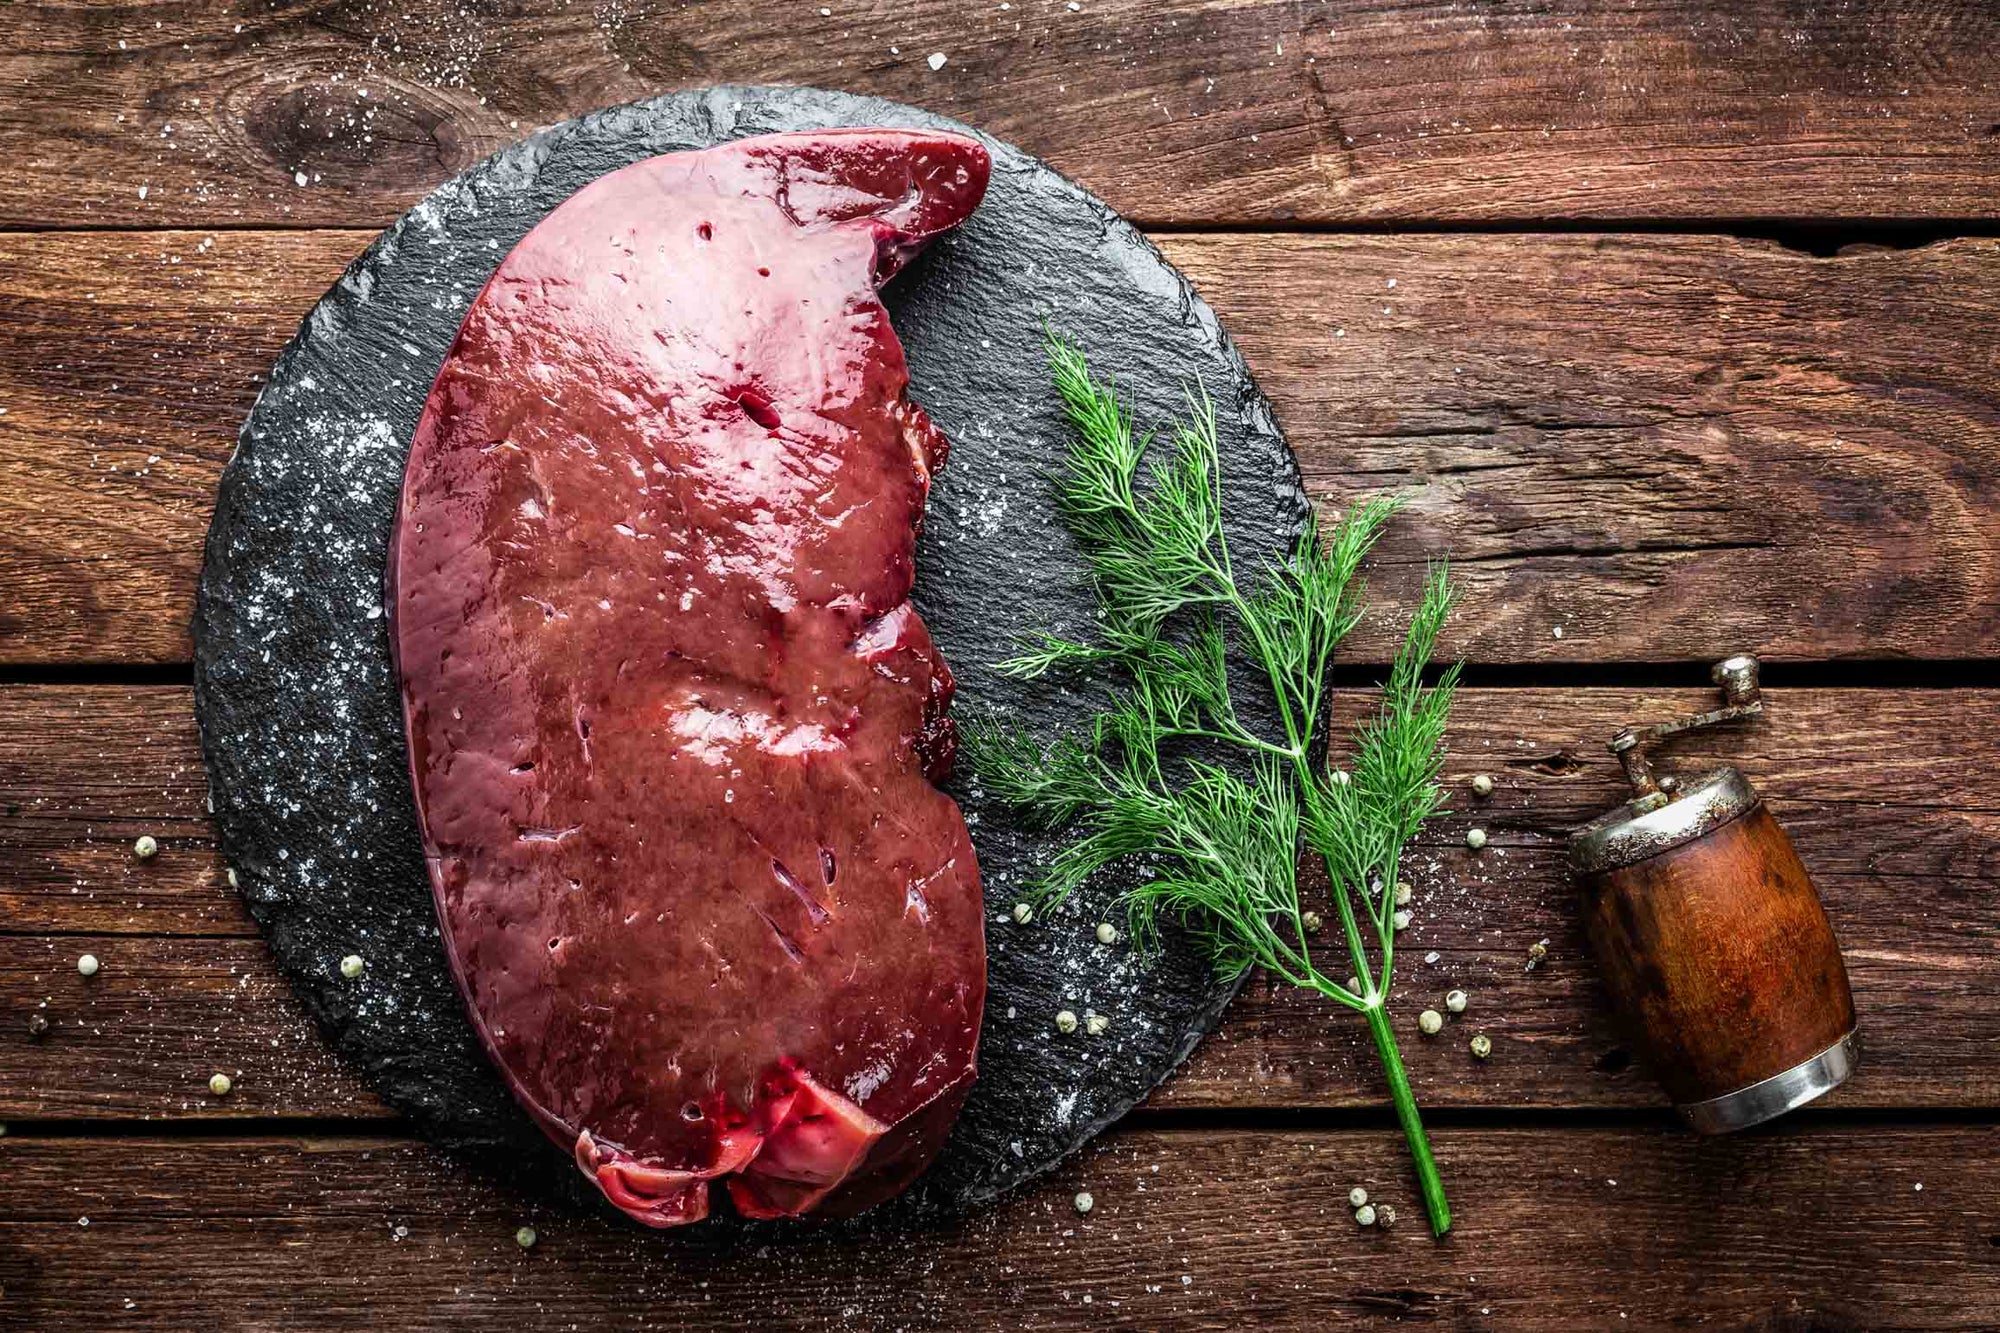 pure 100% rocky mountain elk organ meats organs heart tongue liver sea salt pasture raised non-gmo humanely harvested humane harvest nutrients Northstar Bison clean hide to heart